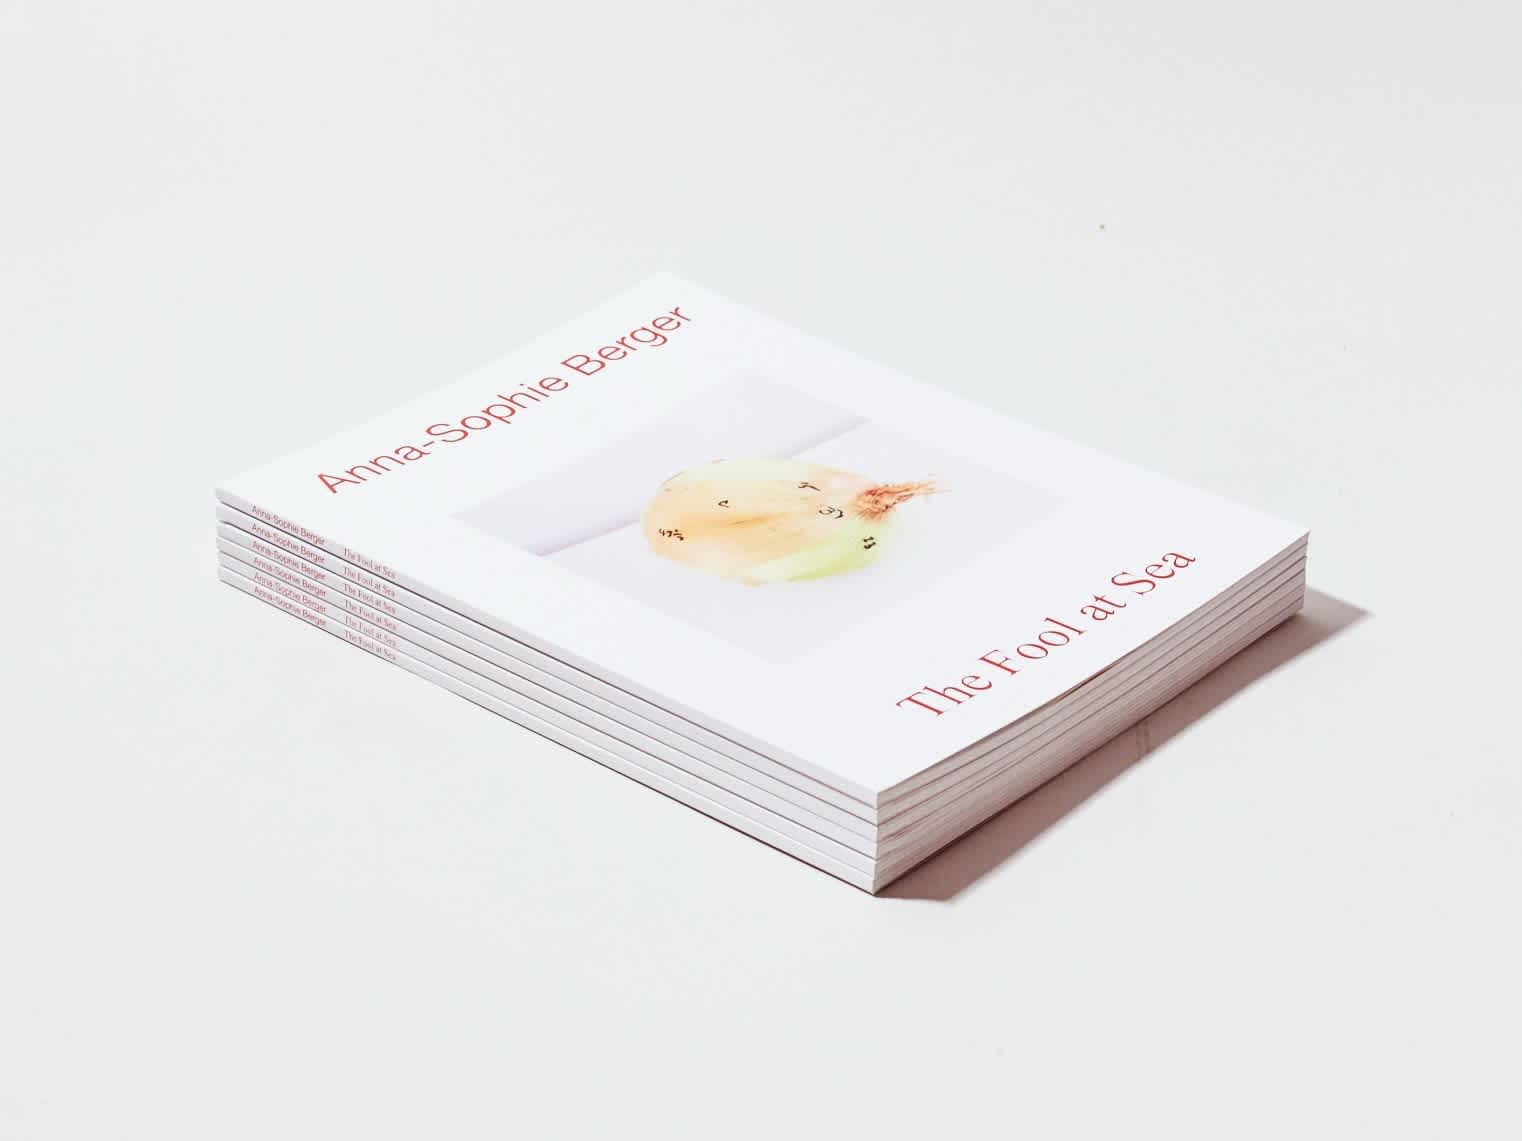 A stack of six white books with red text. A photograph of an onion separates the title and the author's name.